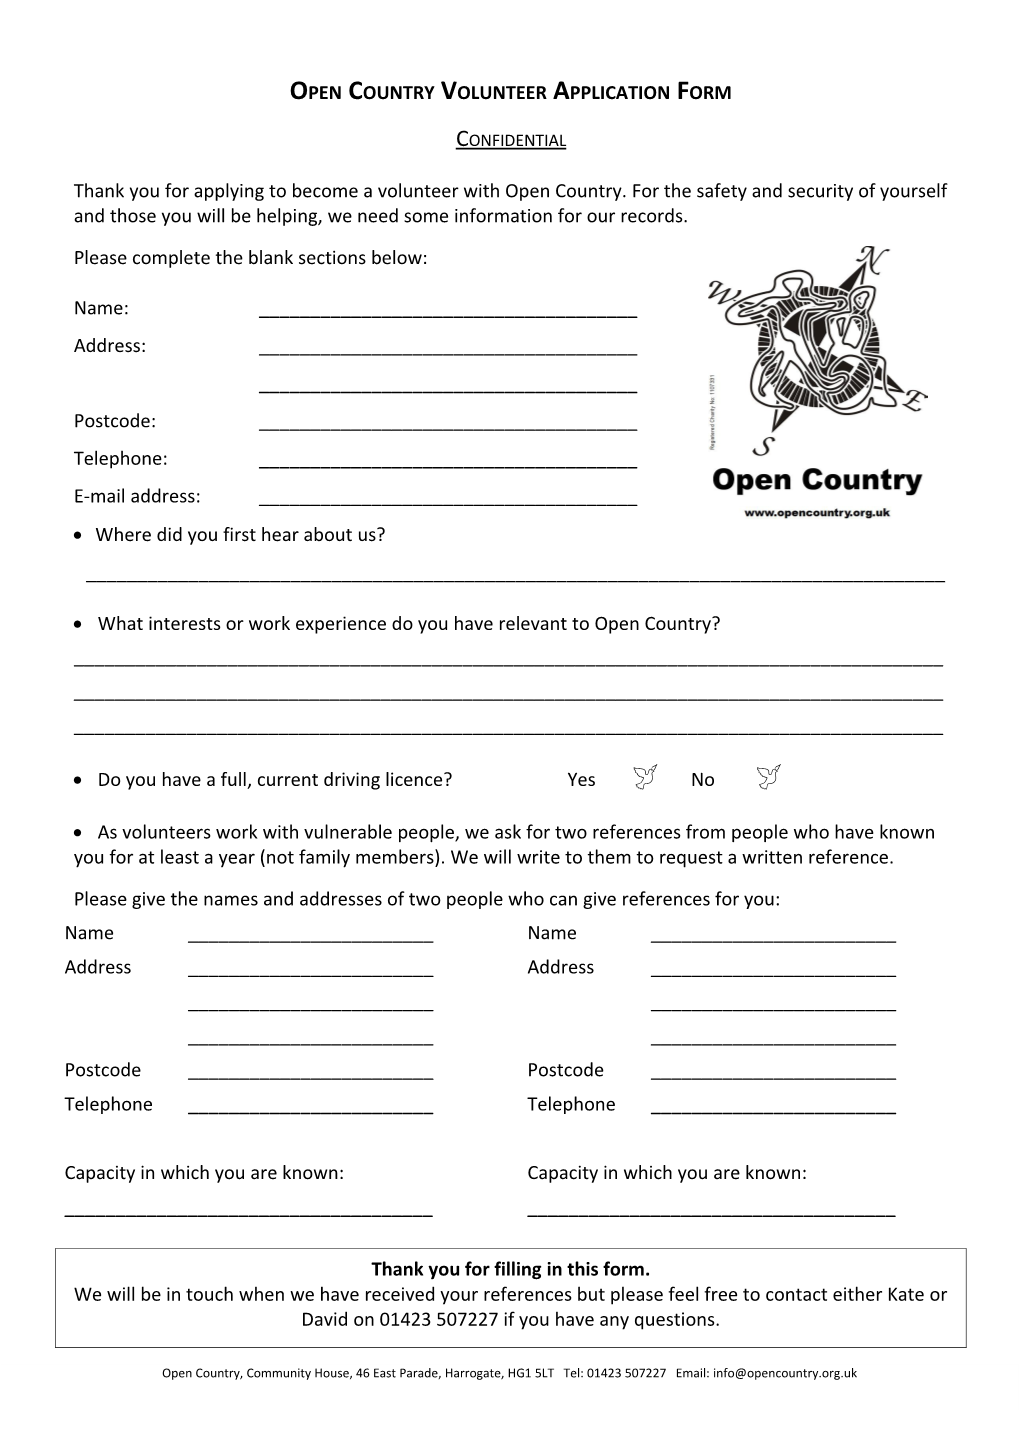 Open Country Volunteer Application Form